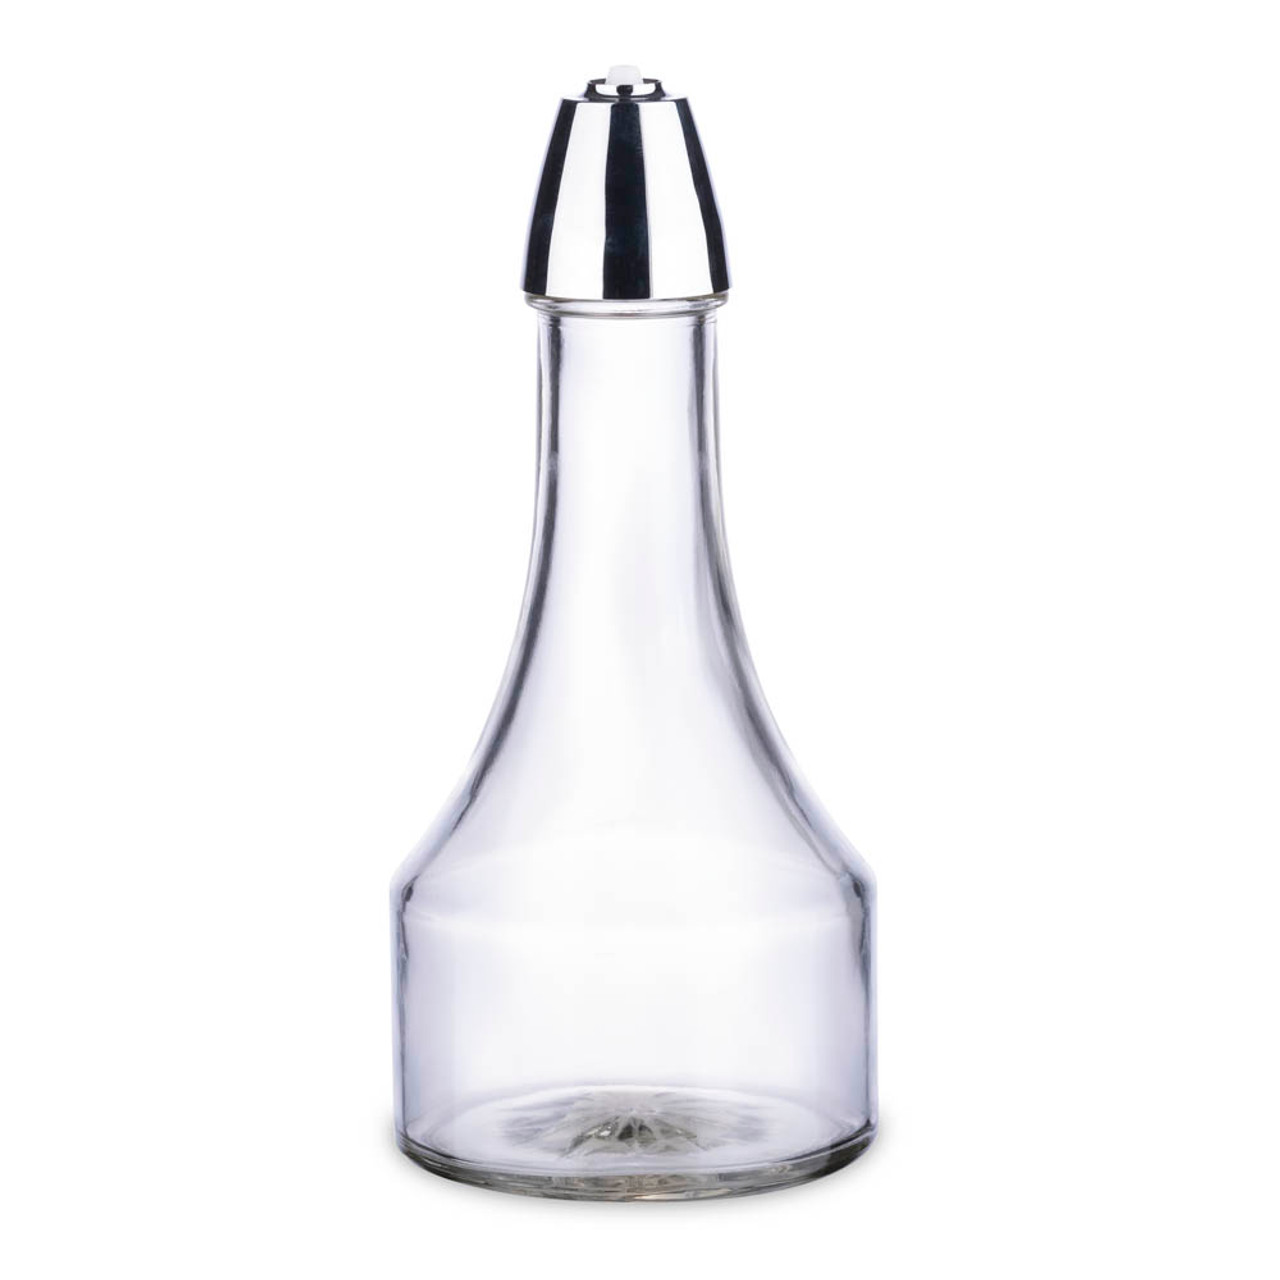 Cocktail Bitters Clear Glass Bottle with Dasher Cap - Empty - 8 oz